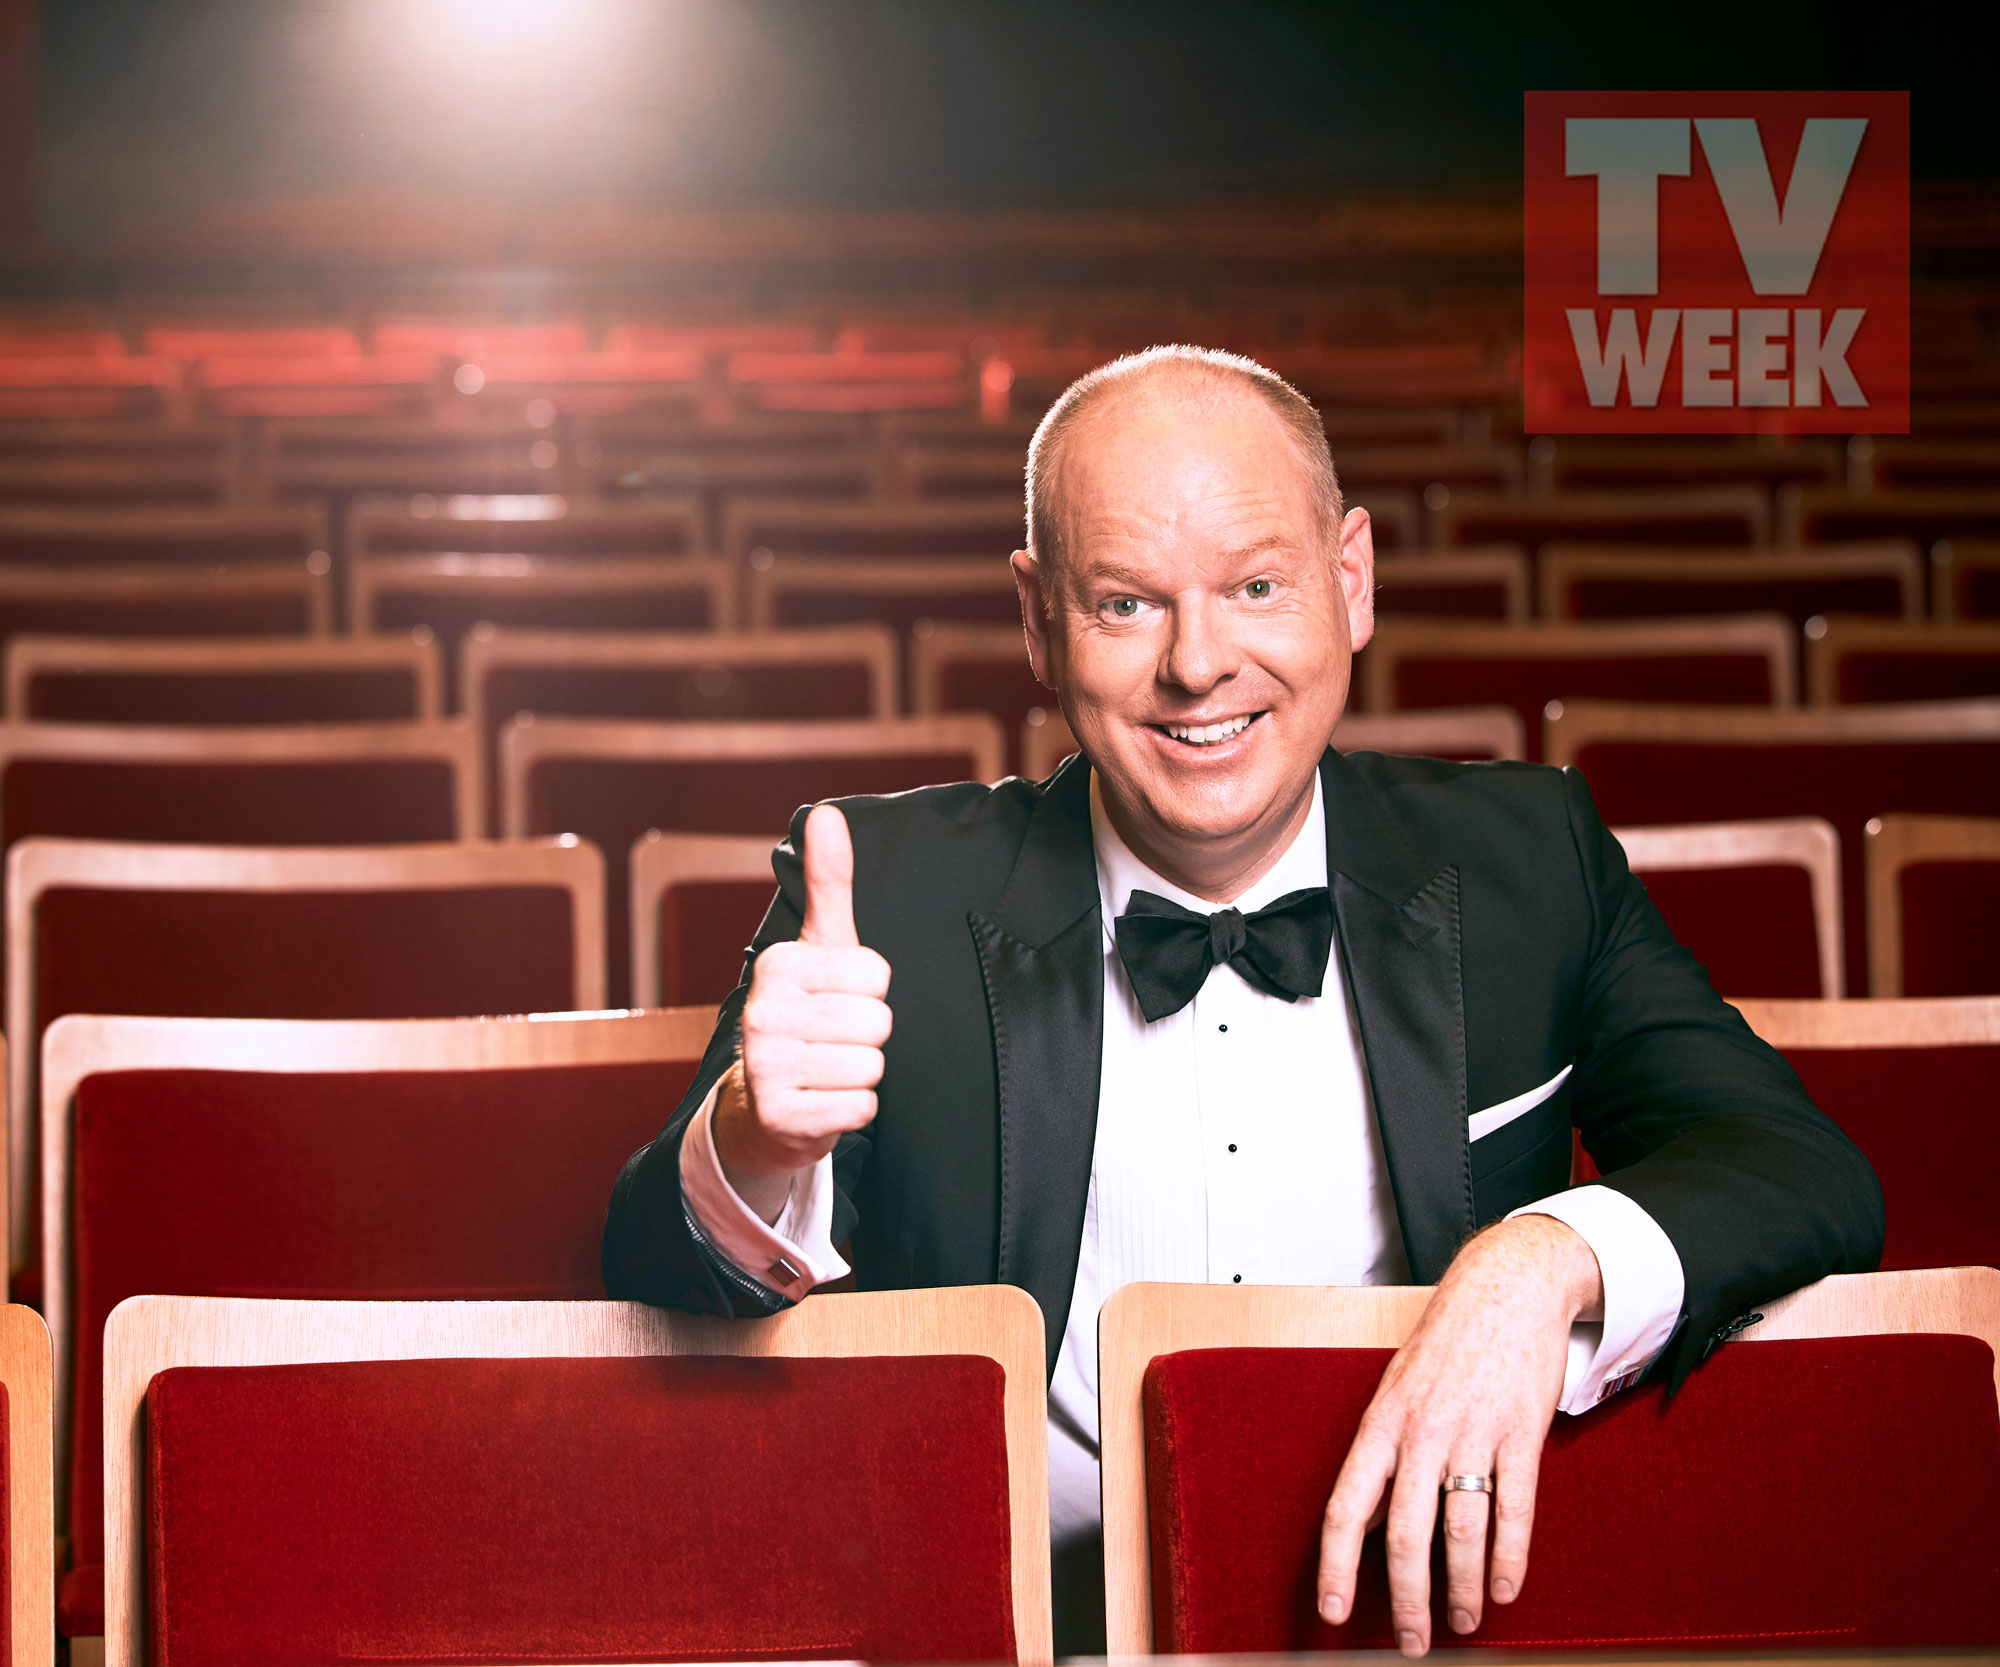 Since winning the TV WEEK Gold Logie Award in 2019, Tom Gleeson has learnt that it’s no laughing matter